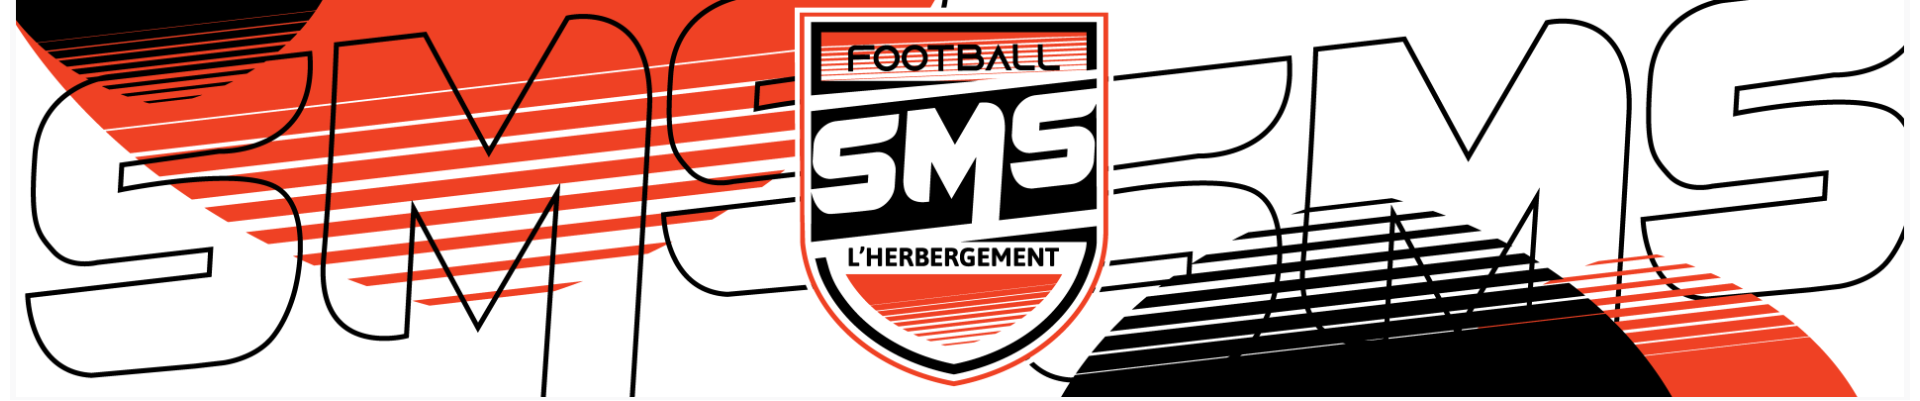 Boutique SMS Football l'Herbergement